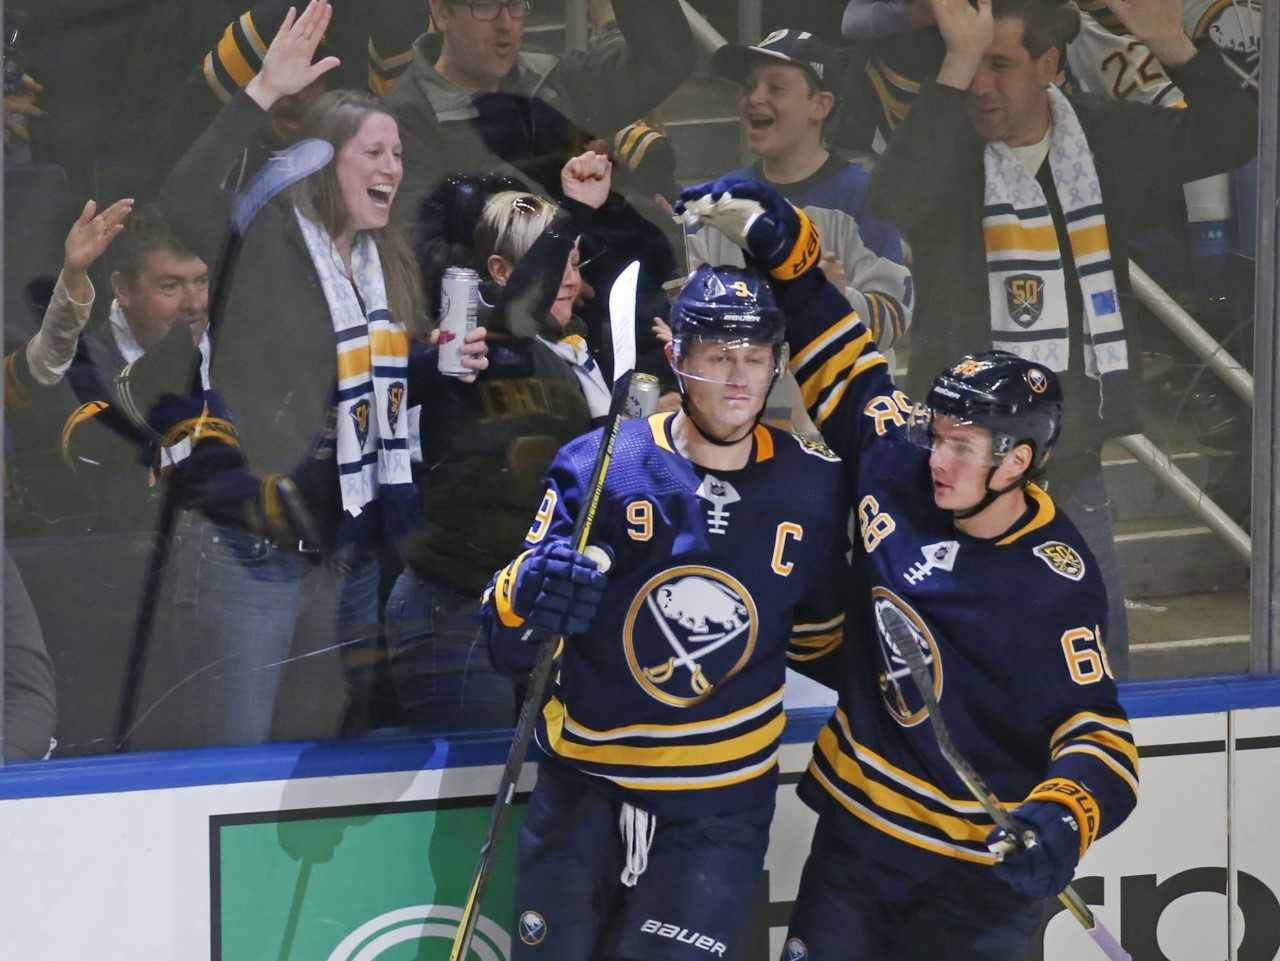 Jack Eichel making his points on 